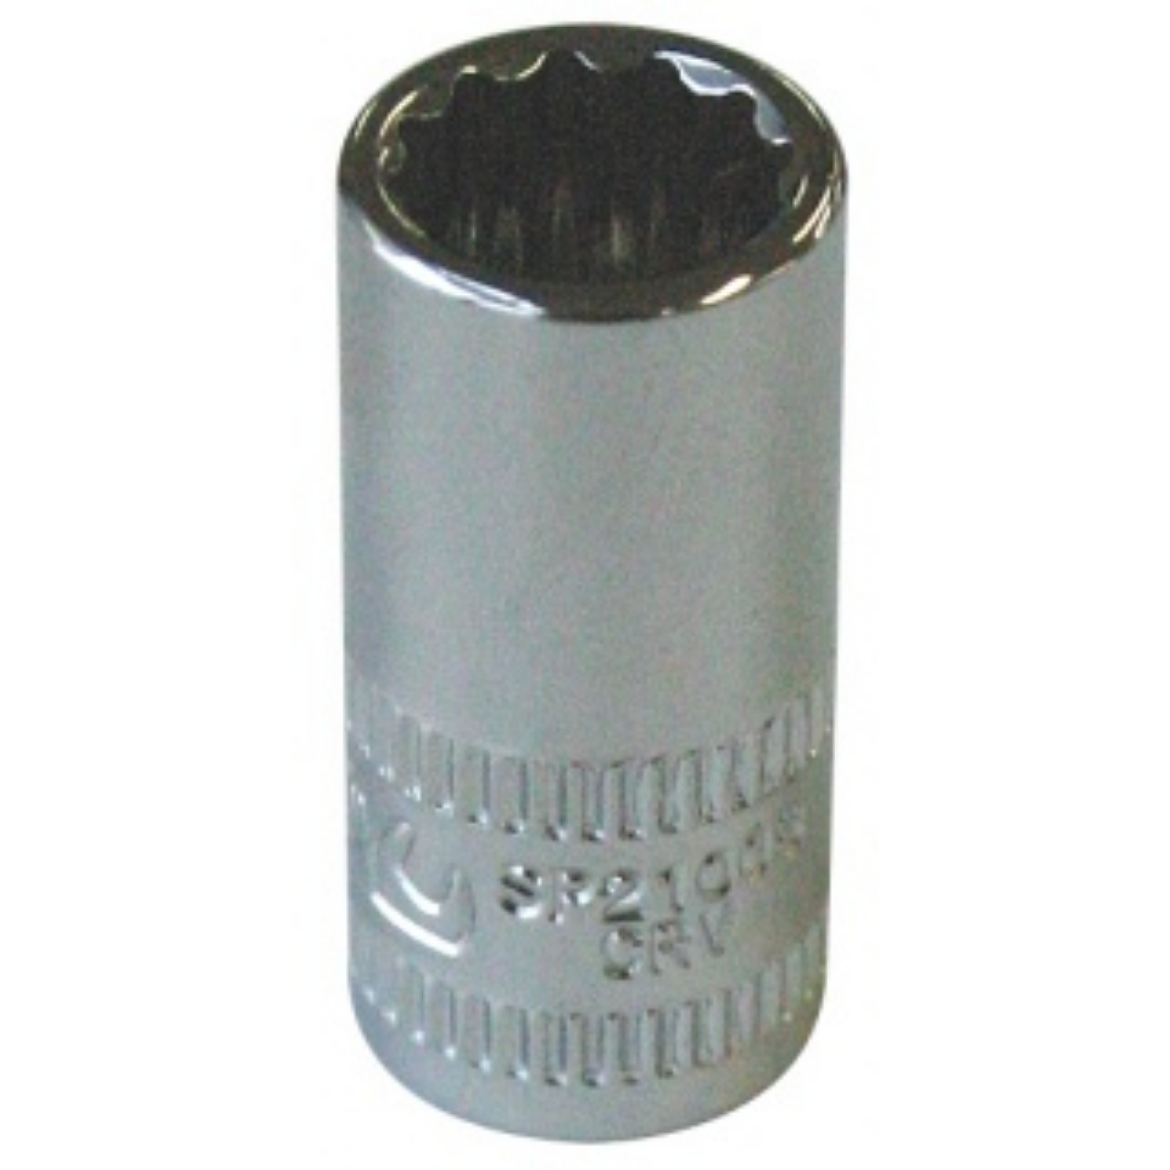 Picture of SOCKET 1/4DR 12 PT METRIC 14MM SP TOOLS